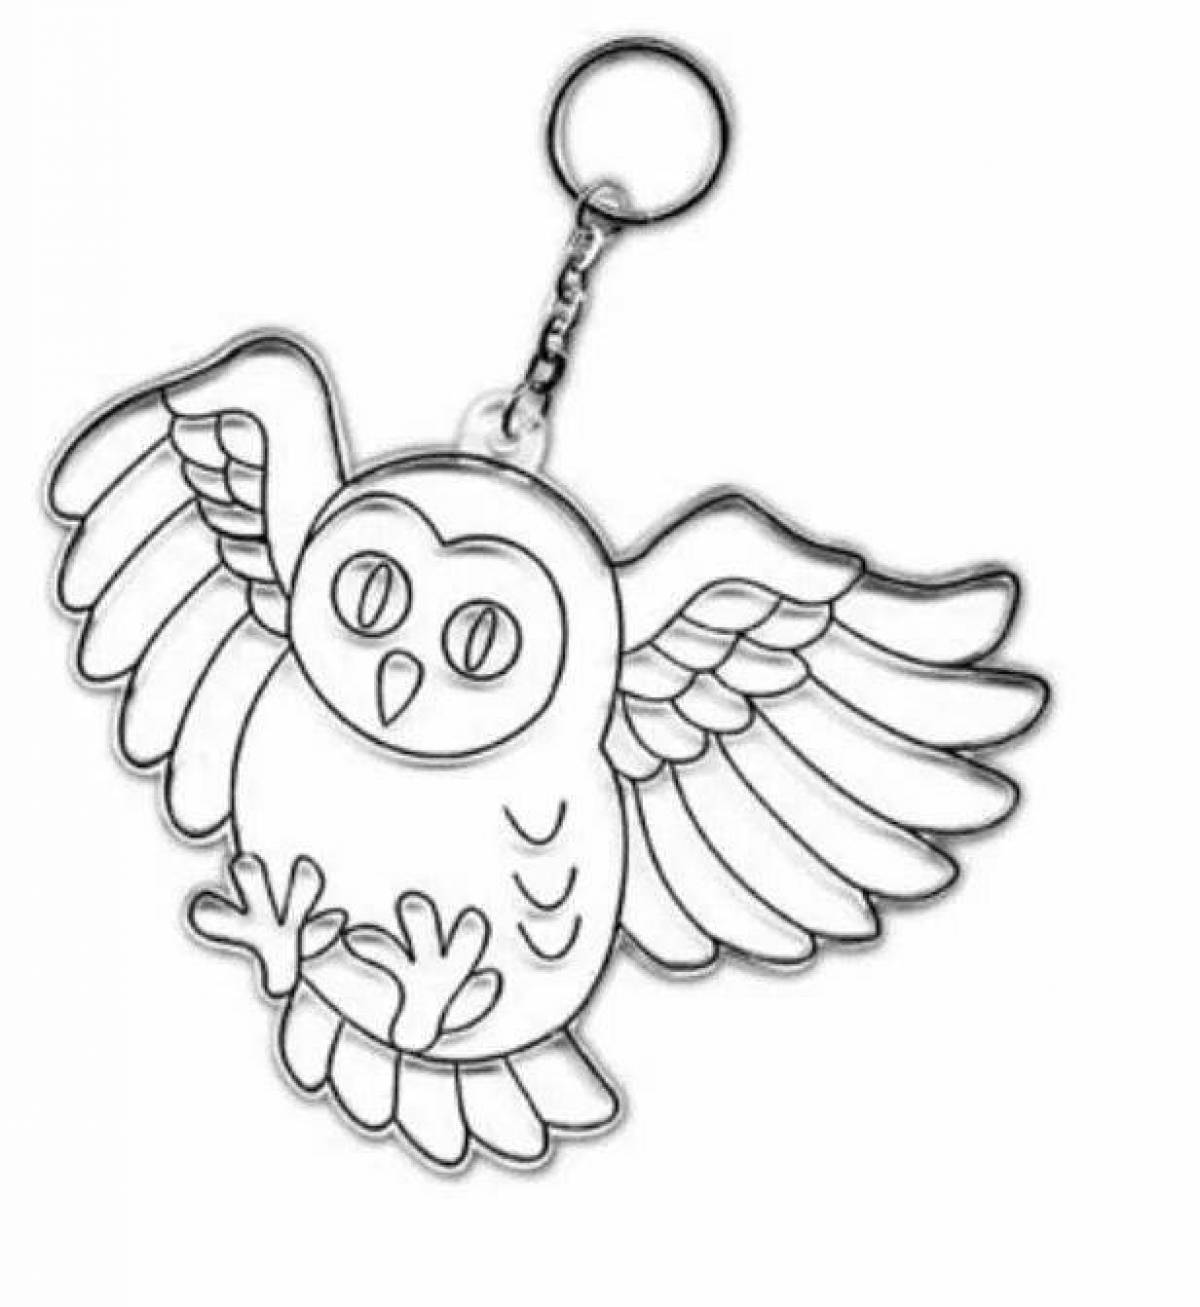 Coloring book charming keychain